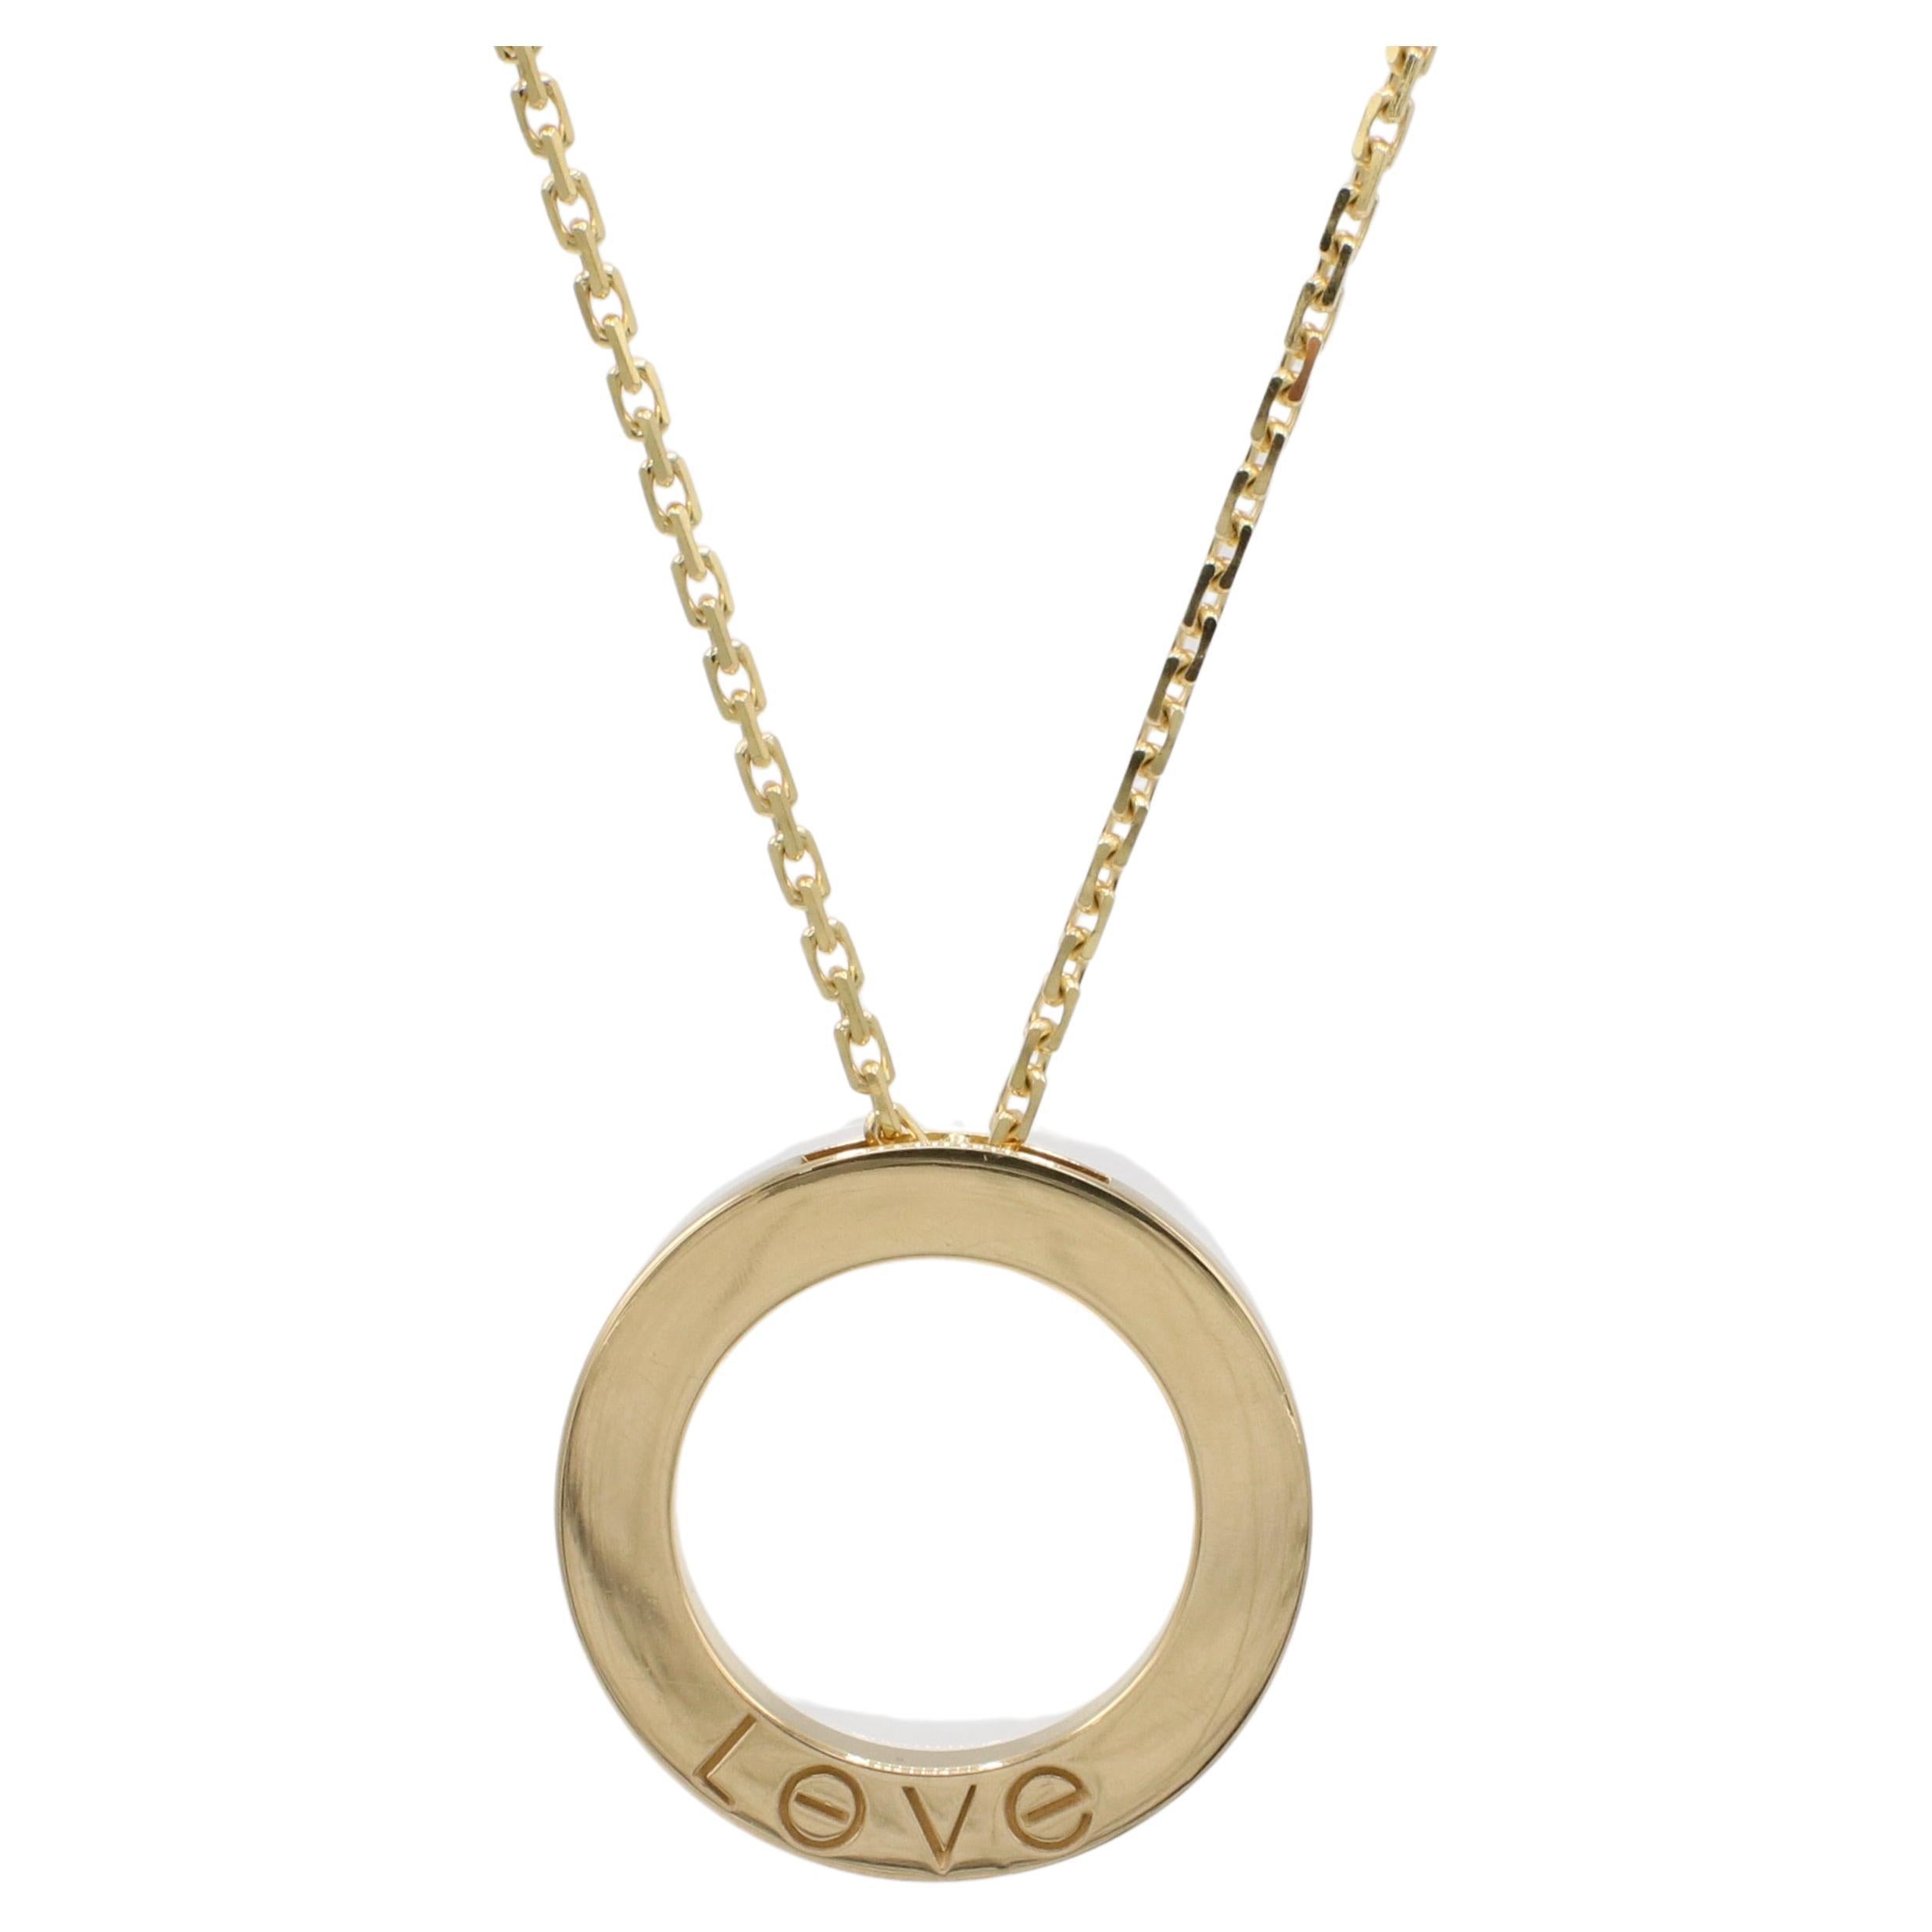 Modern Cartier Love 18 Karat Yellow Gold Pendant Drop Necklace Box & Papers For Sale